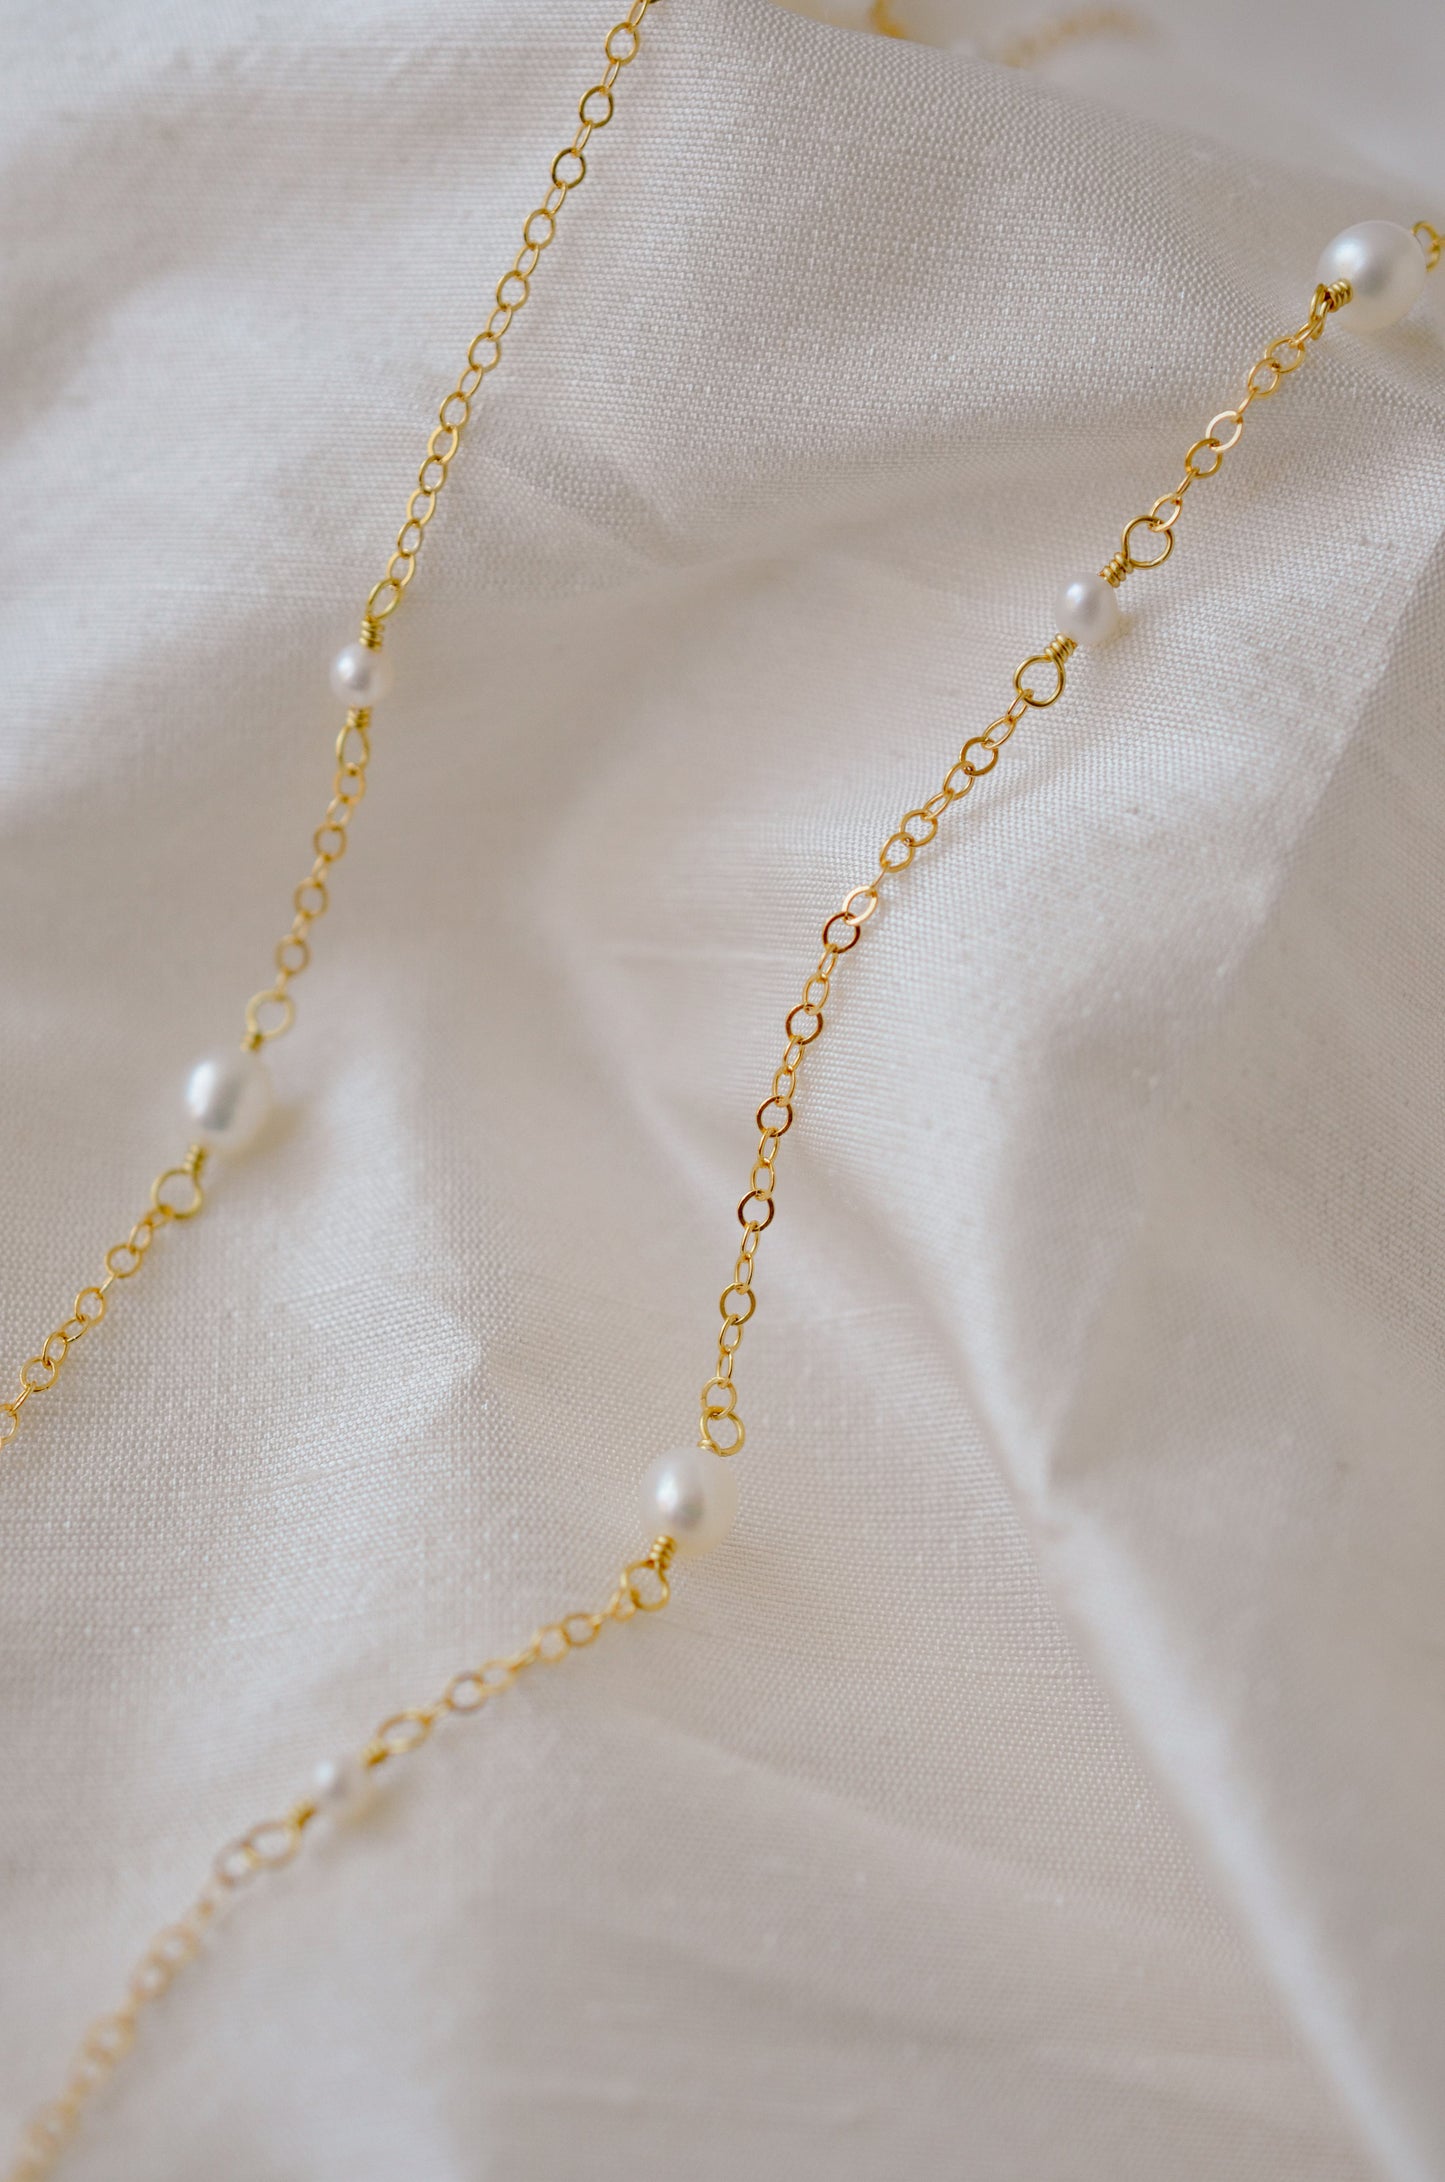 Alternating Pearl Necklace in Gold Filled or Sterling Silver